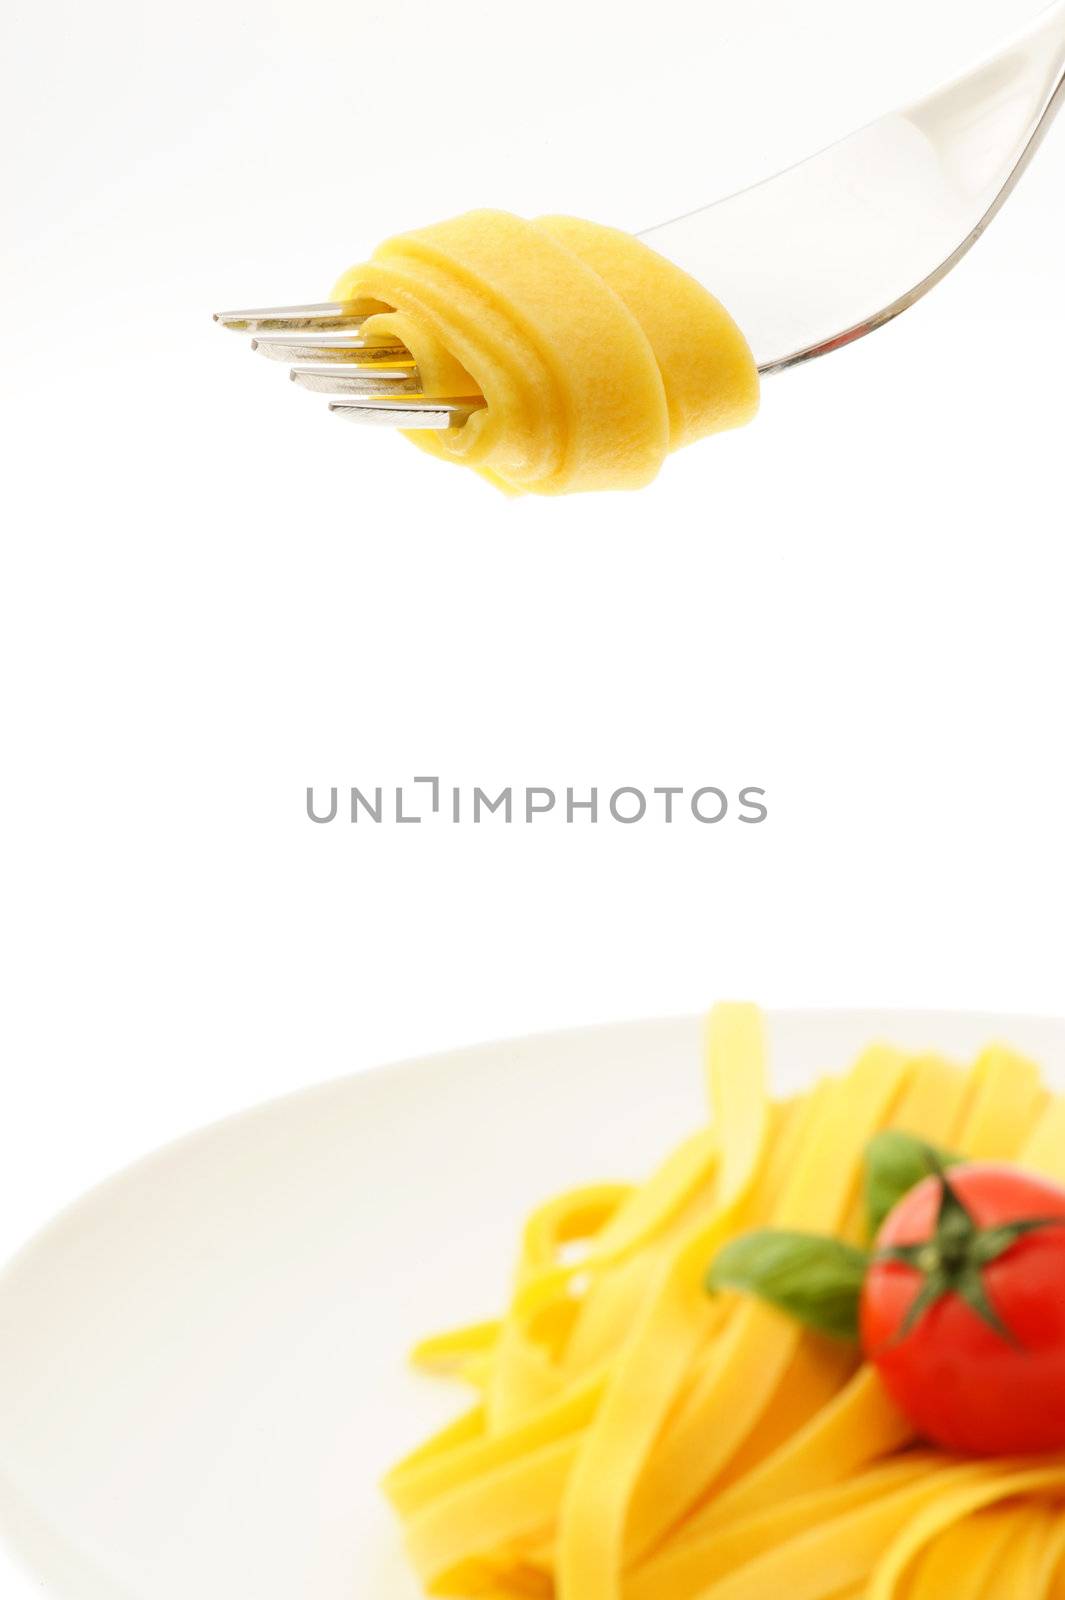 Rolled spaghetti on a fork by stokkete